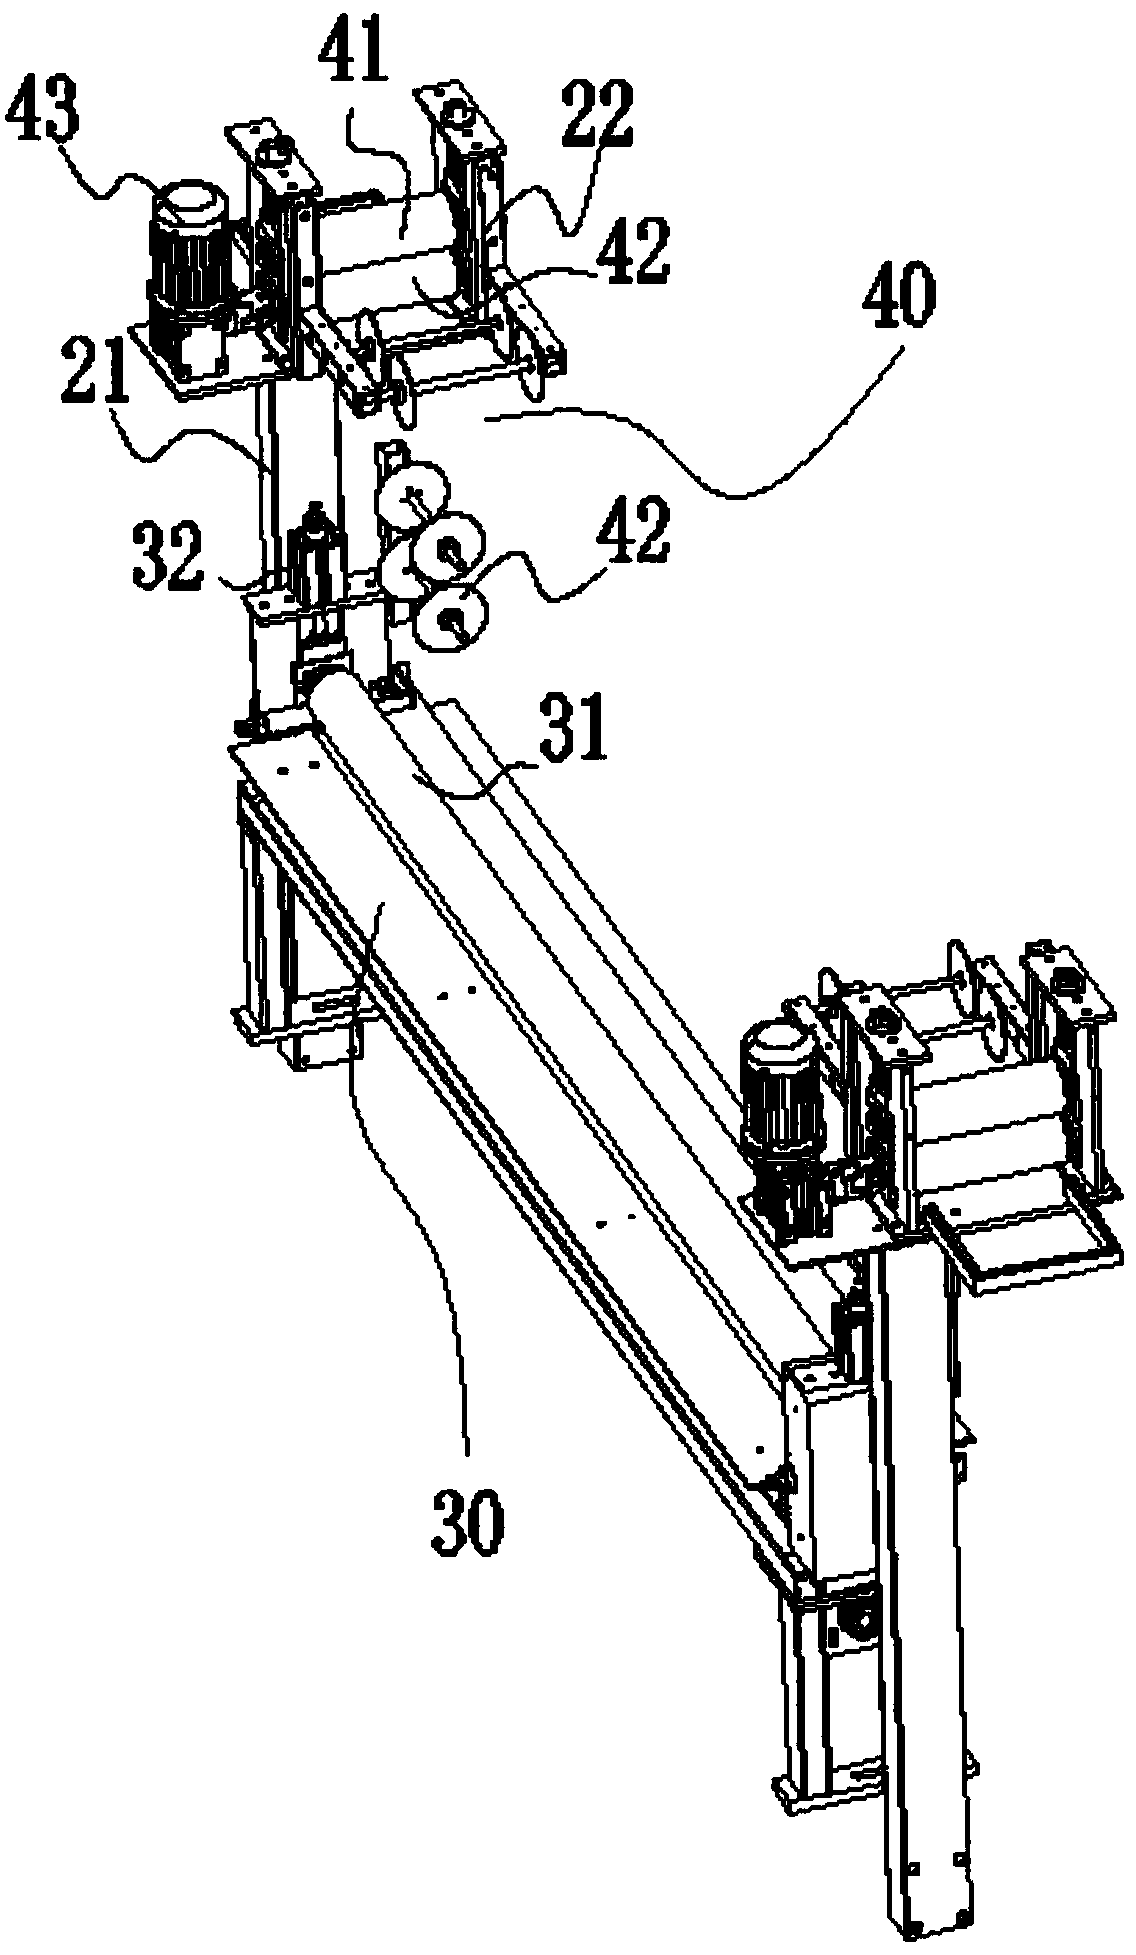 Full-automatic four-side sewing machine